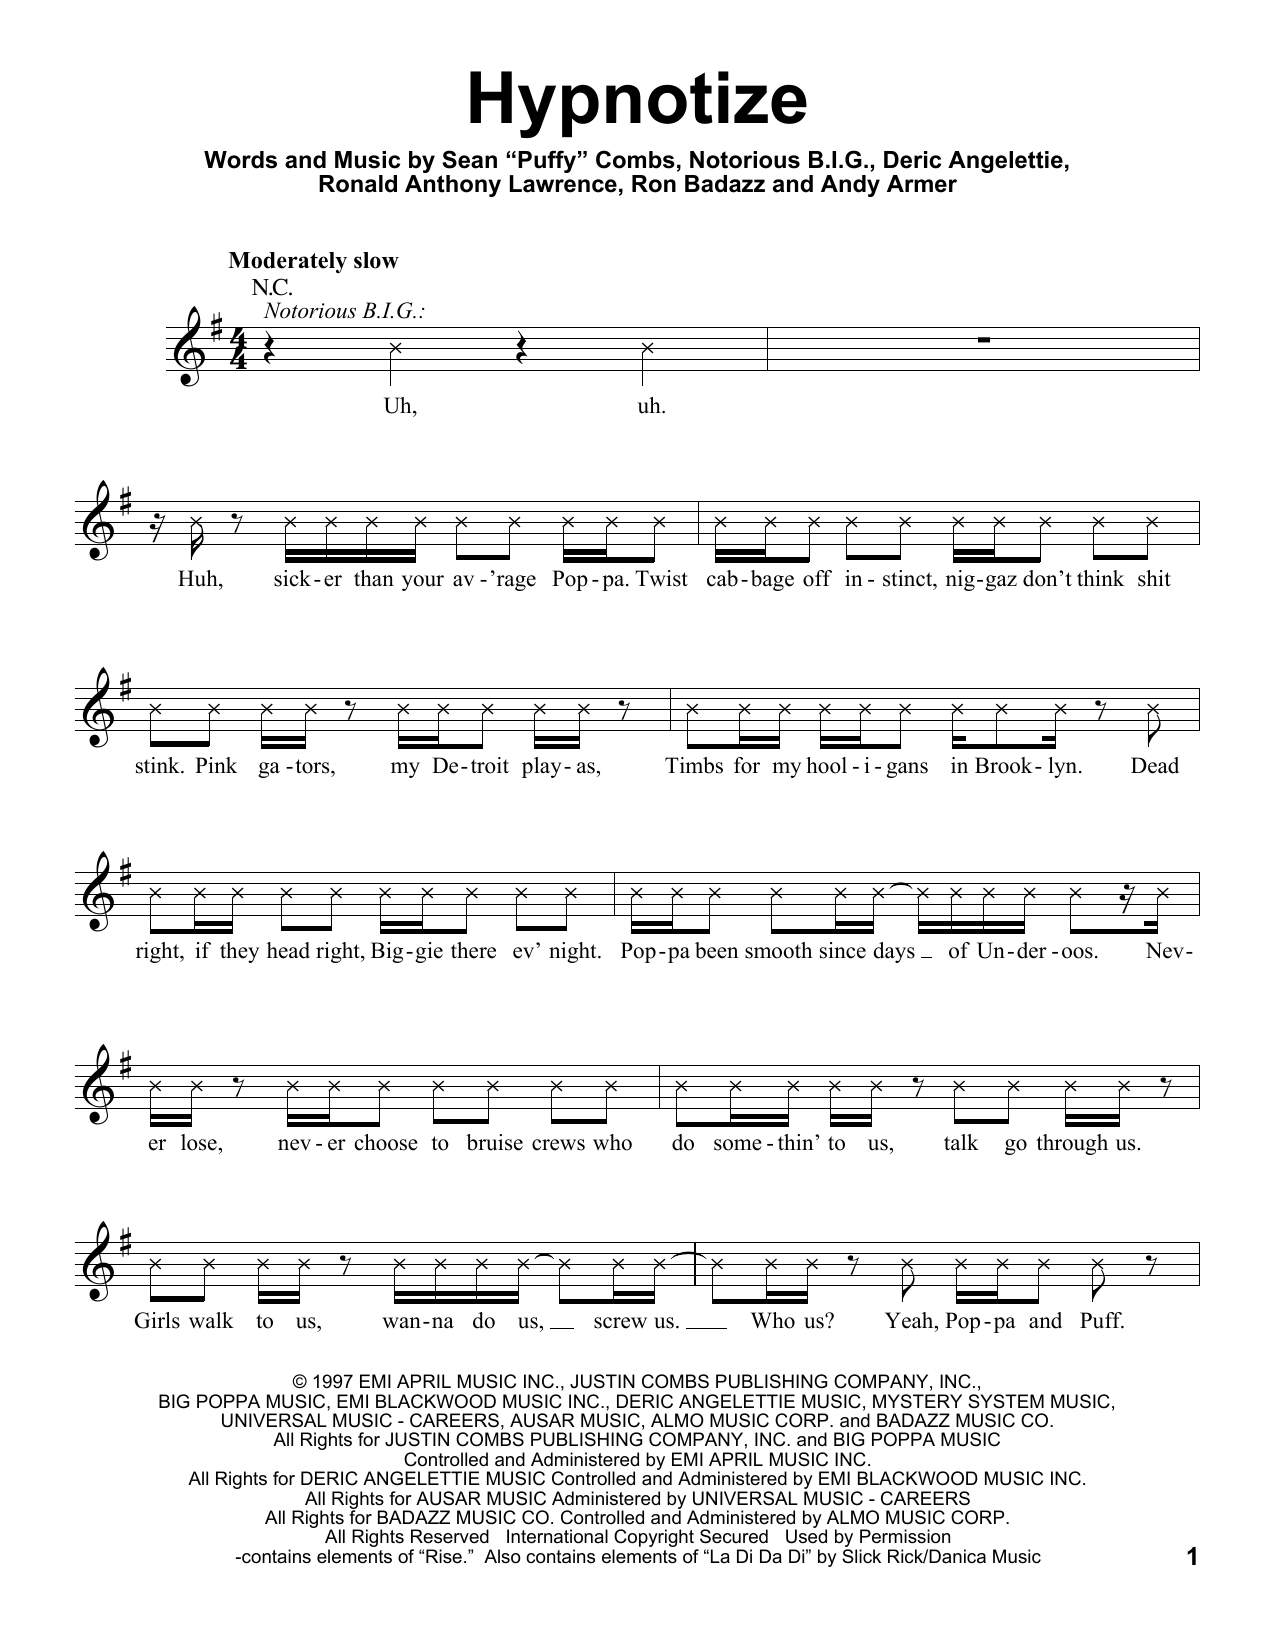 Download The Notorious B.I.G. Hypnotize Sheet Music